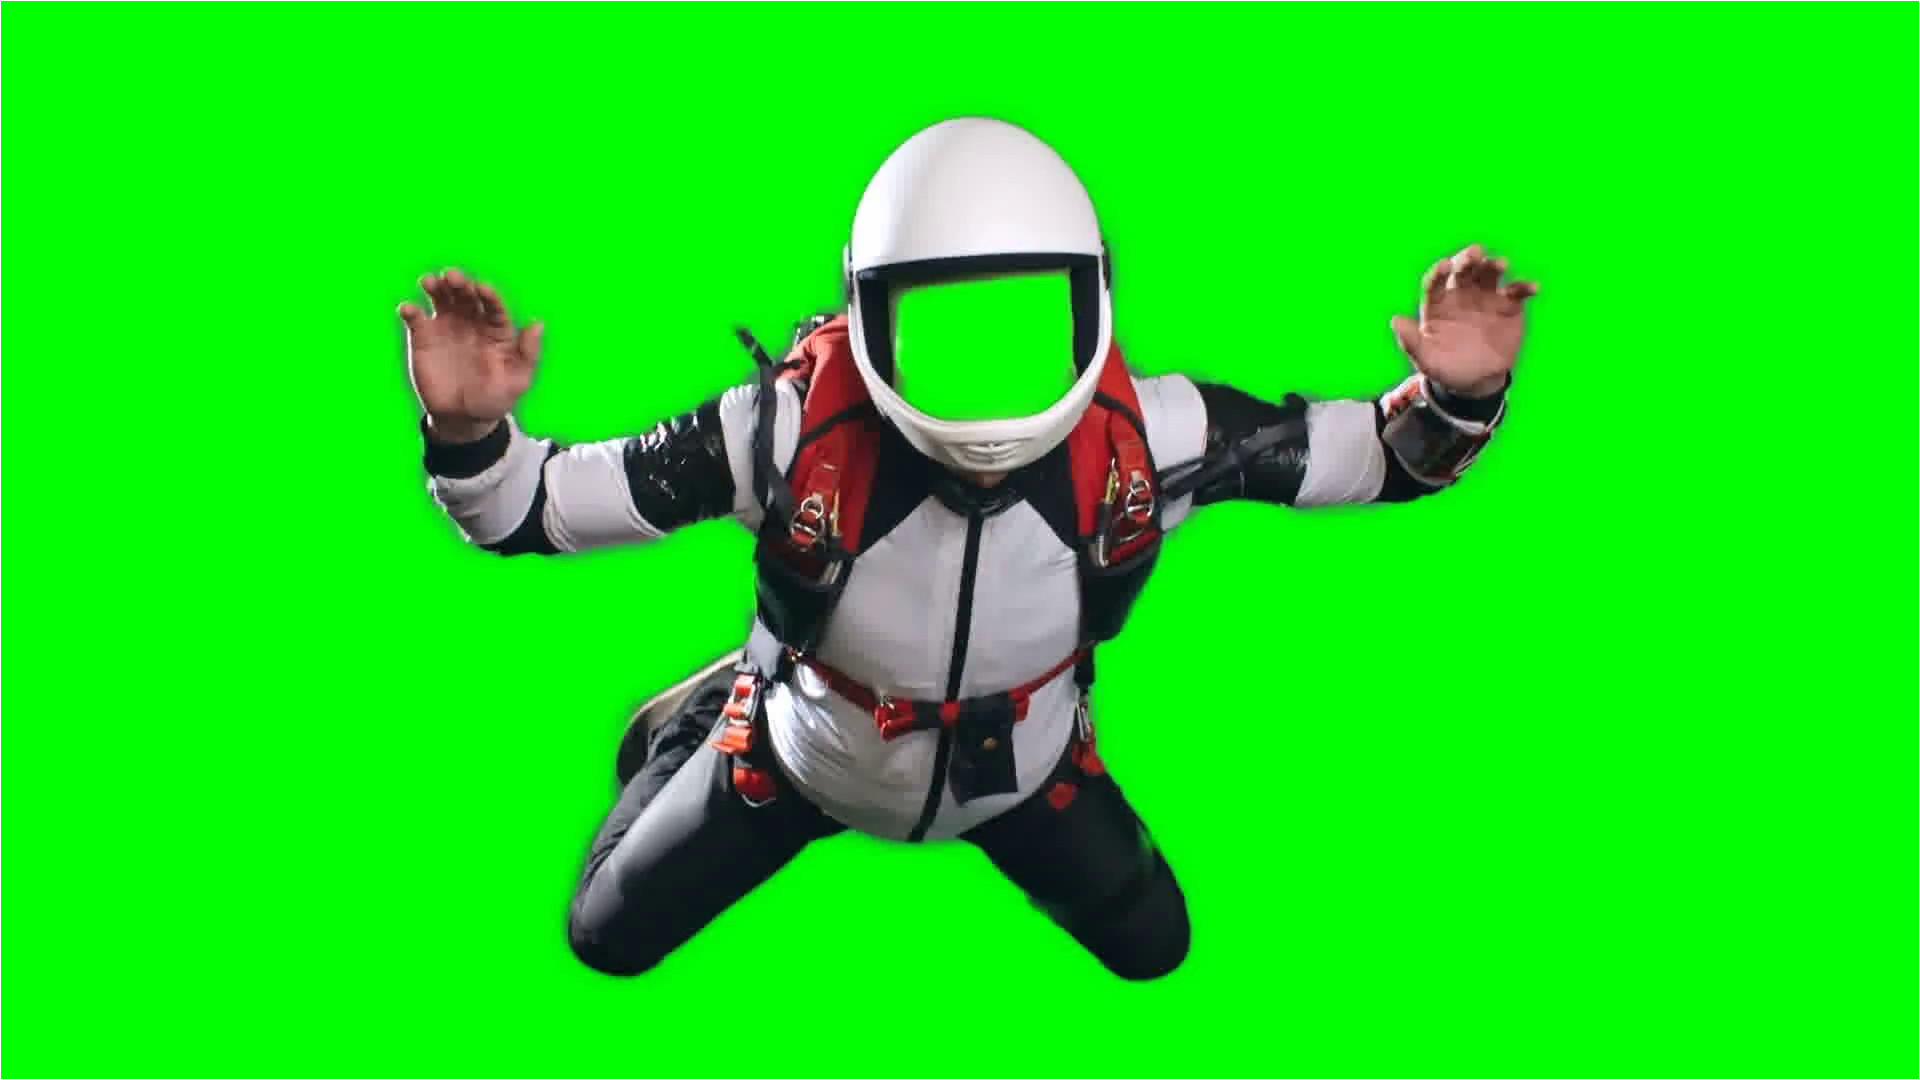 no face chroma key template for video editing slow motion shot of young man parachutist in full gear white helmet jumpsuit and harness performing free fall against green screen background h0t2yrboisfkk984